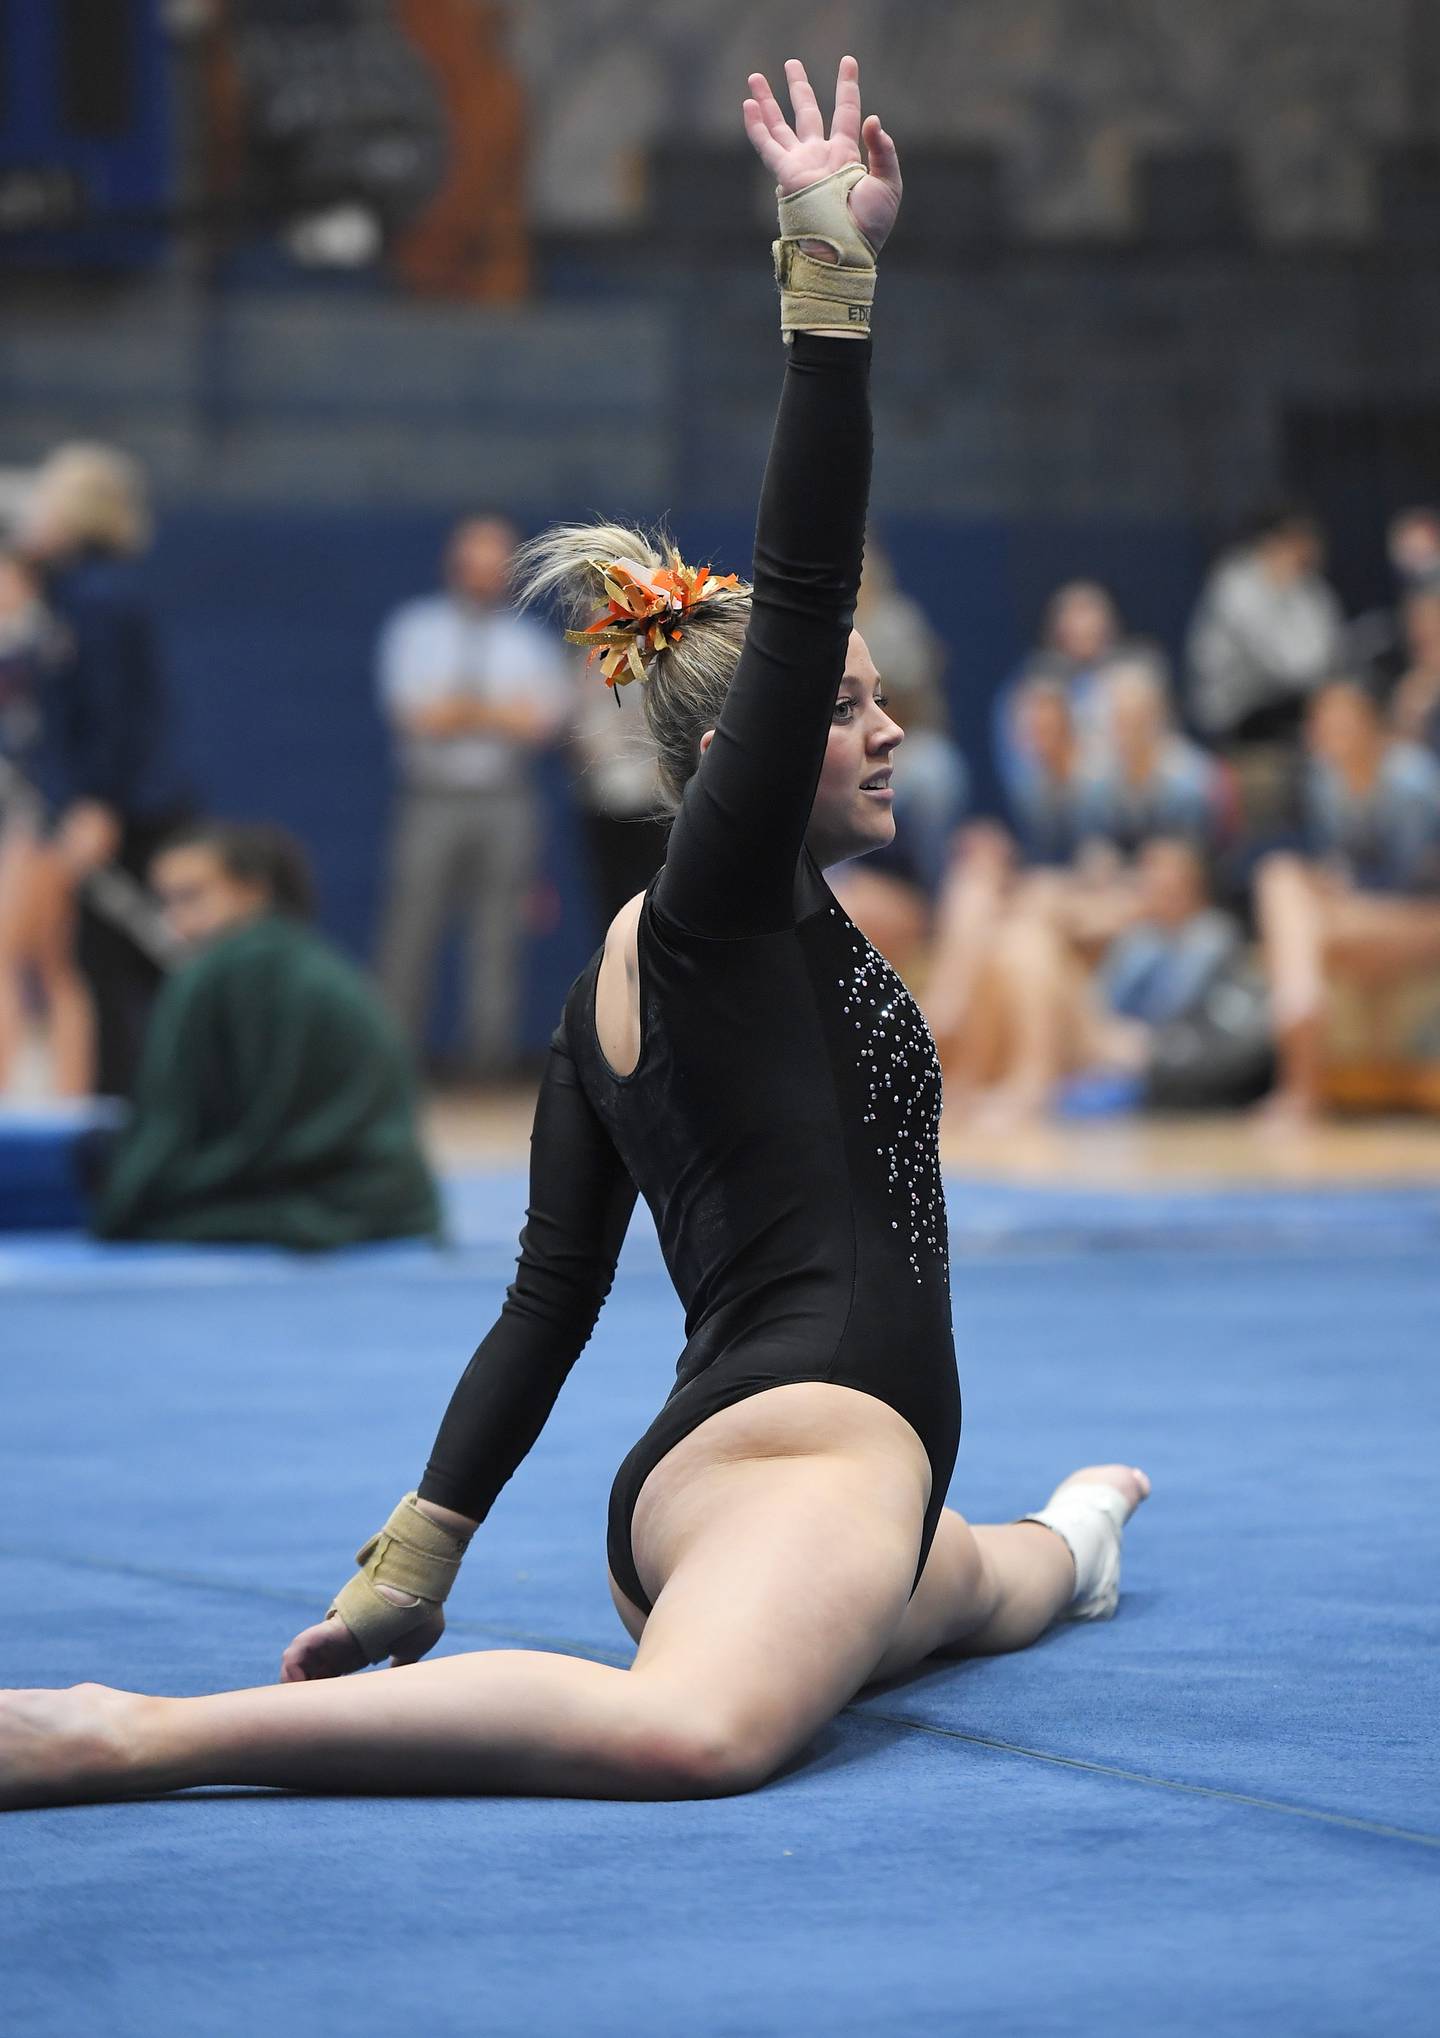 DeKalb’s Eden Russell performs her floor exercise routine at the Lake Park girls gymnastics sectional meet in Roselle on Monday, February 6, 2023.